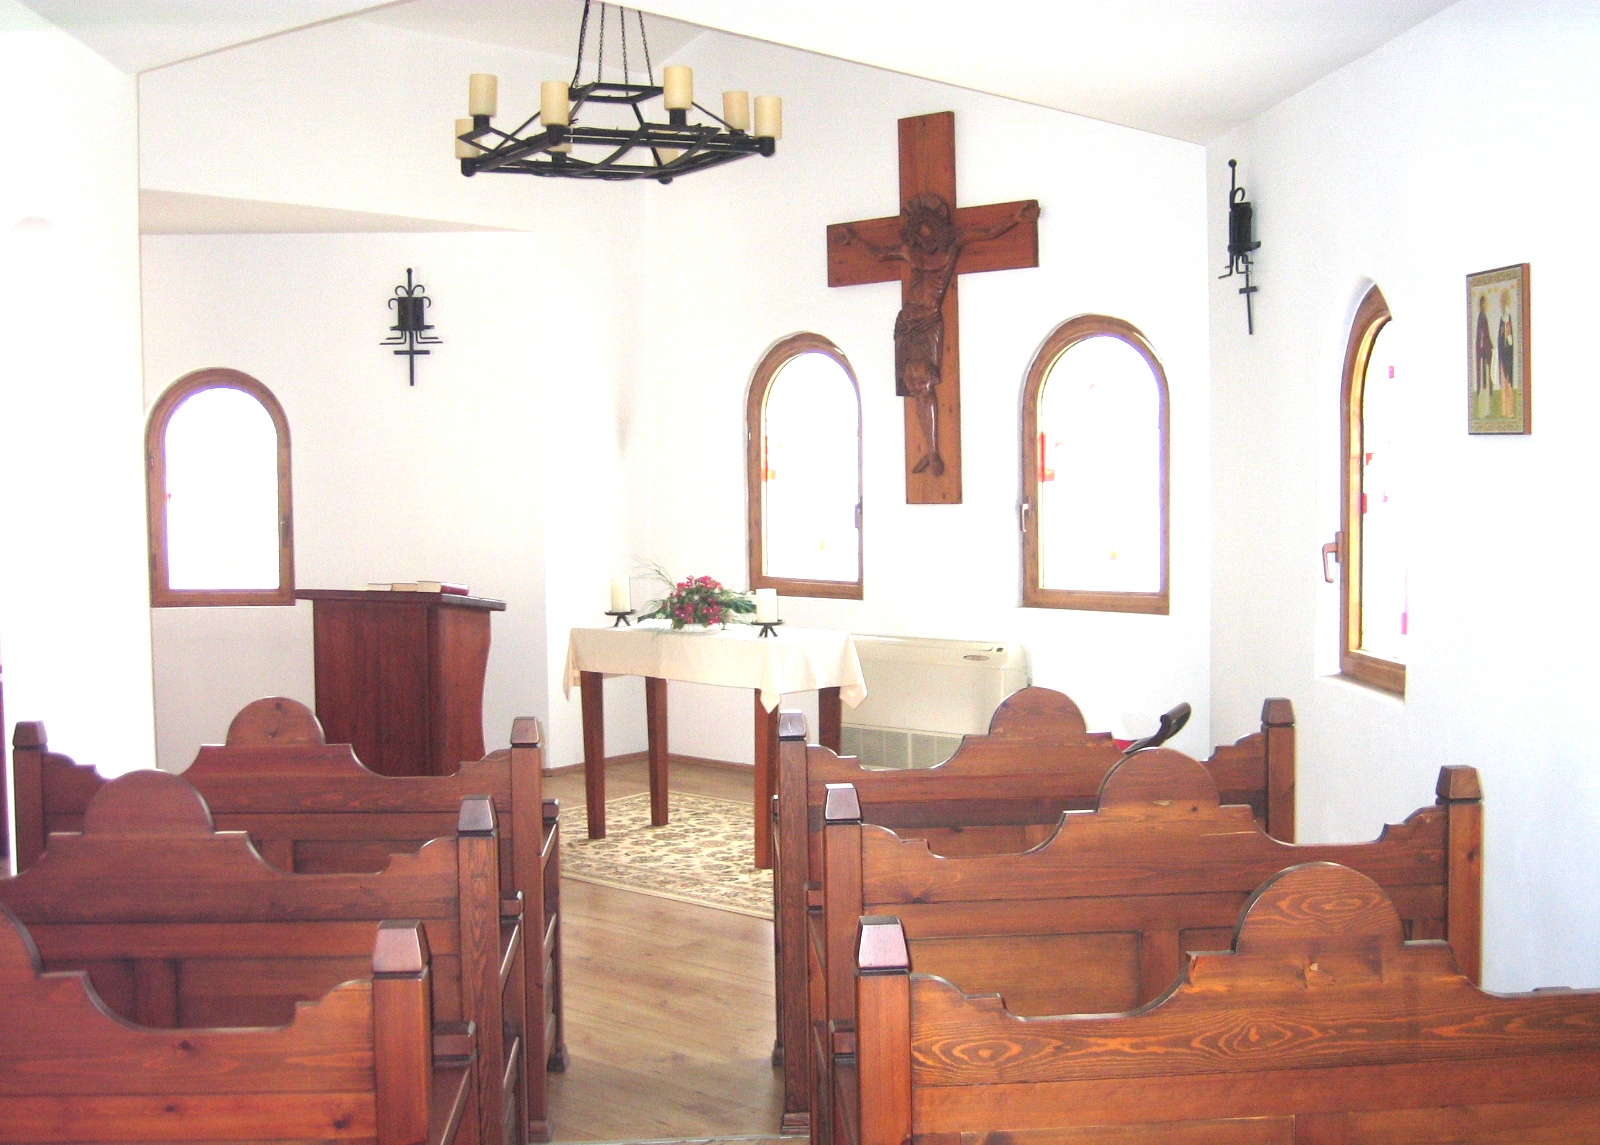 the interior of a small chapel with pews and benches